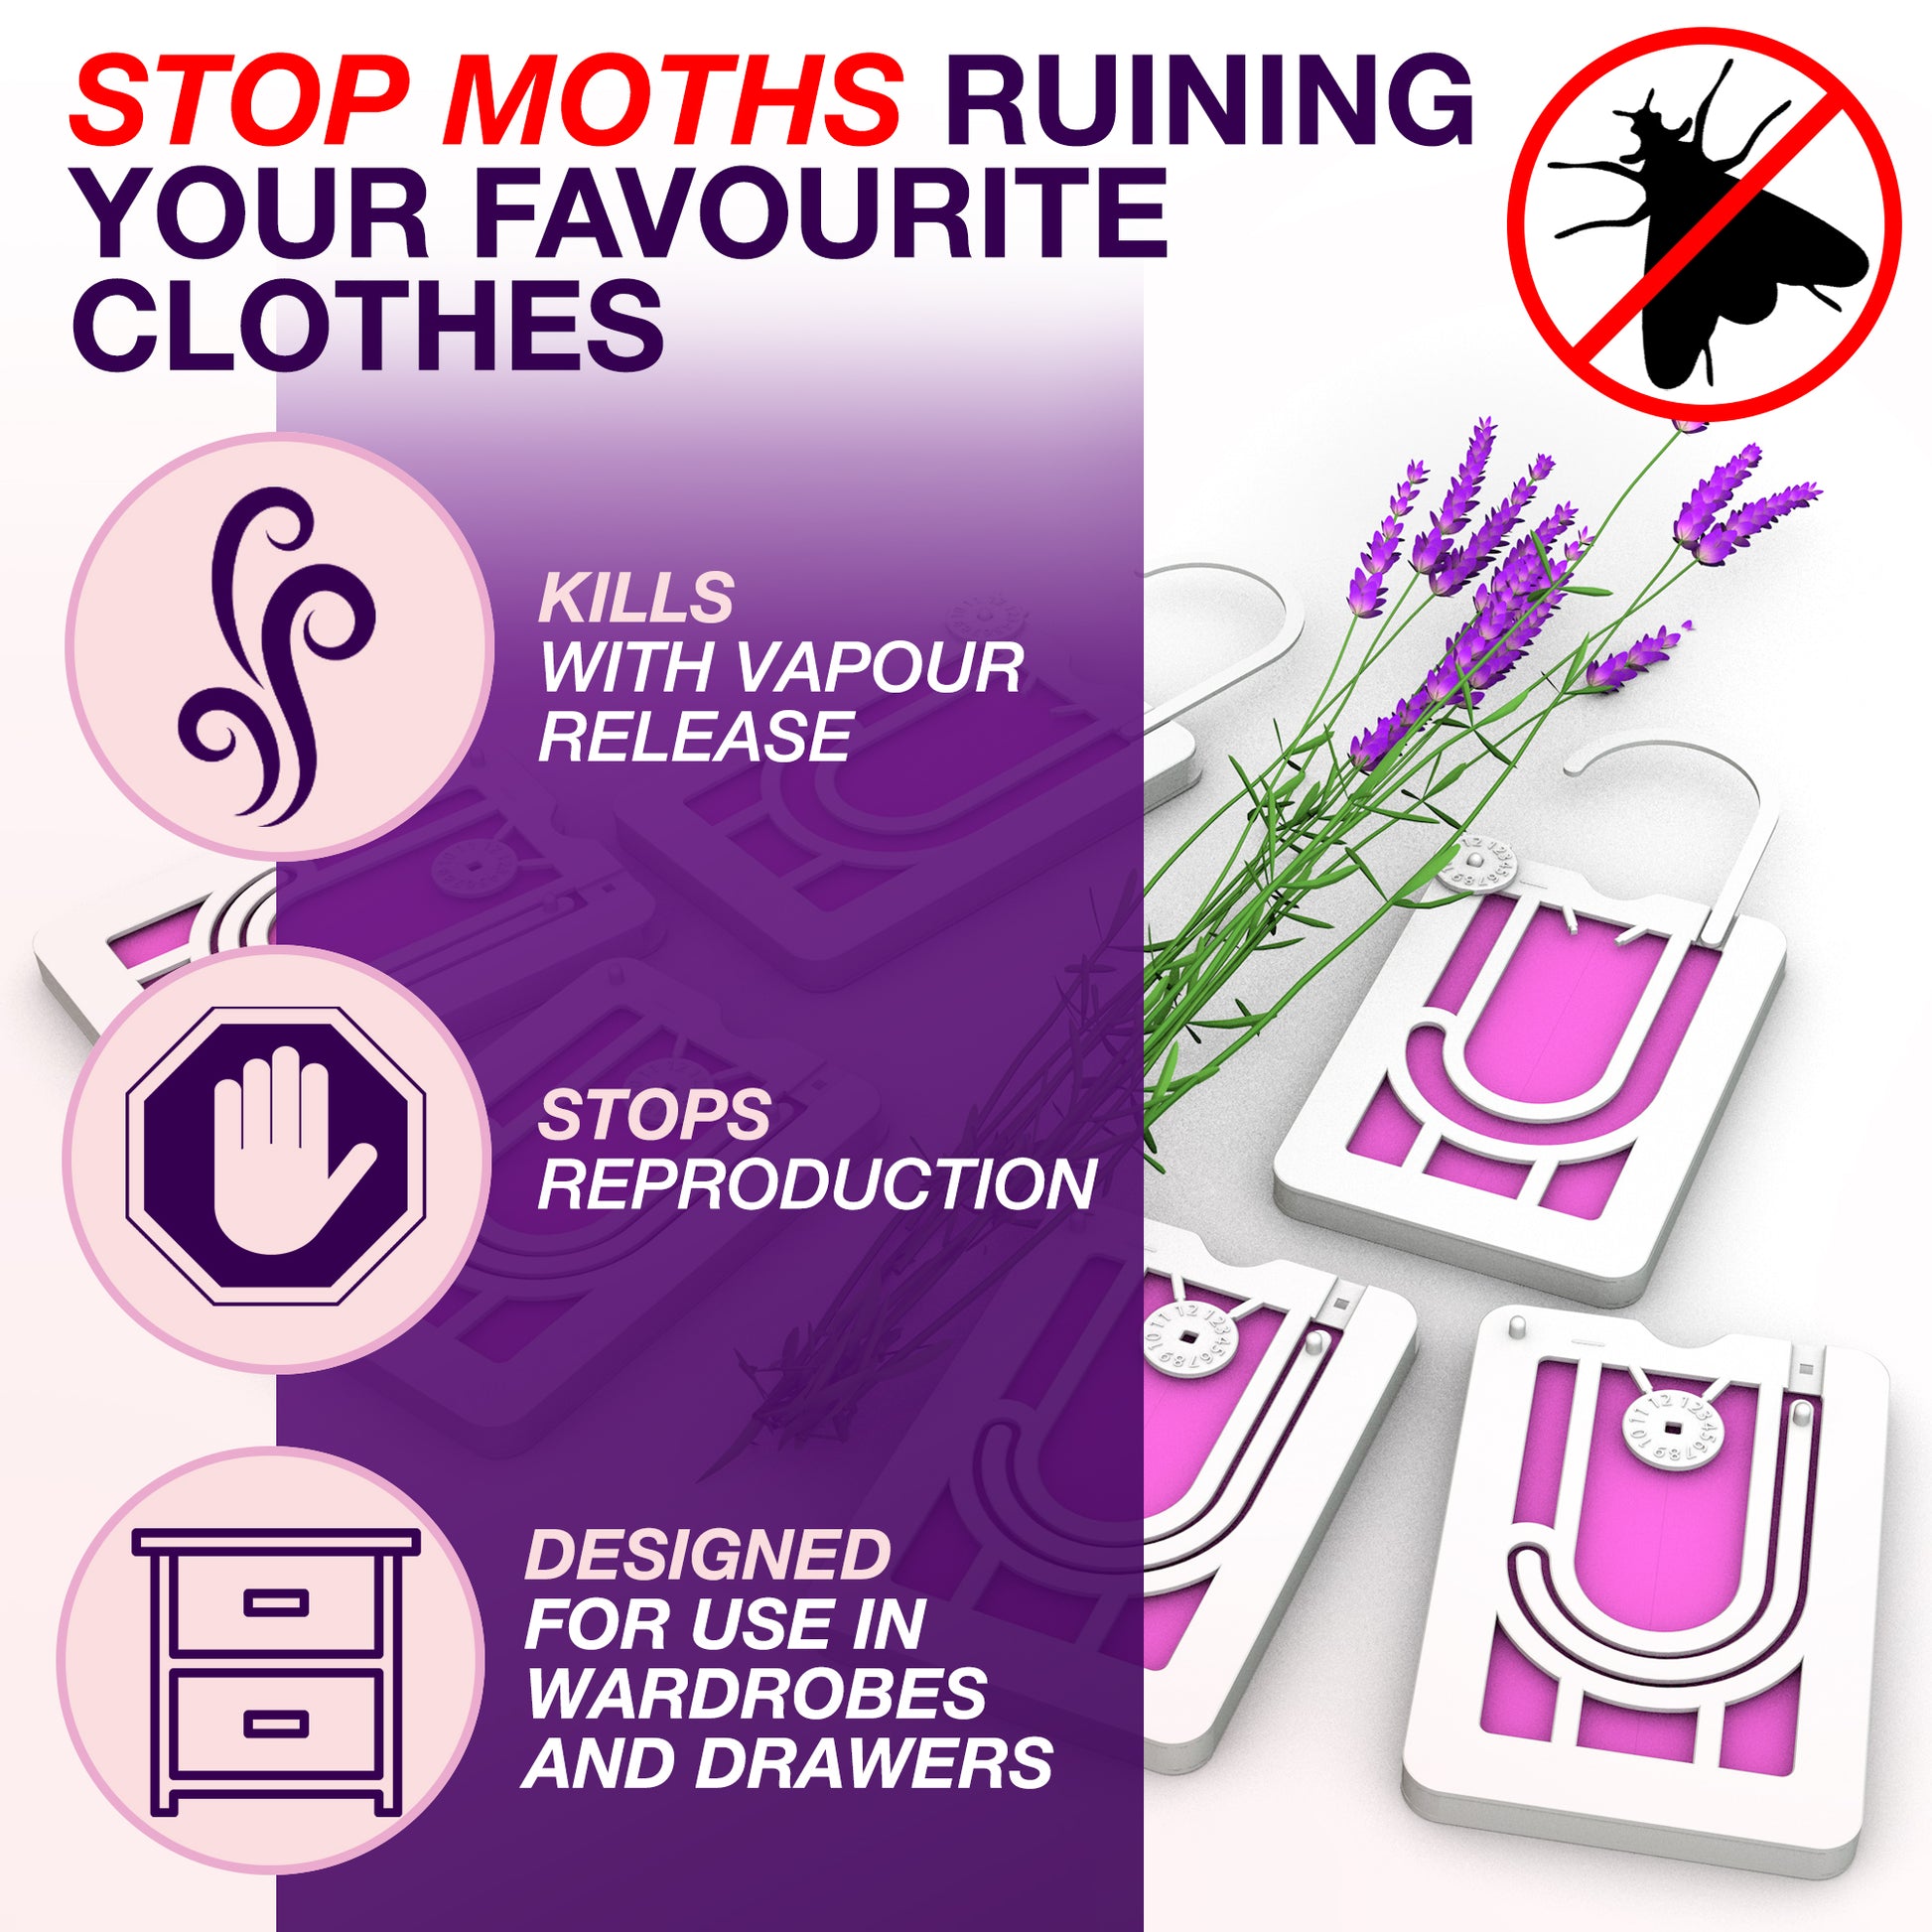 Wholesale clothes moth traps for Safe and Effective Pest Control